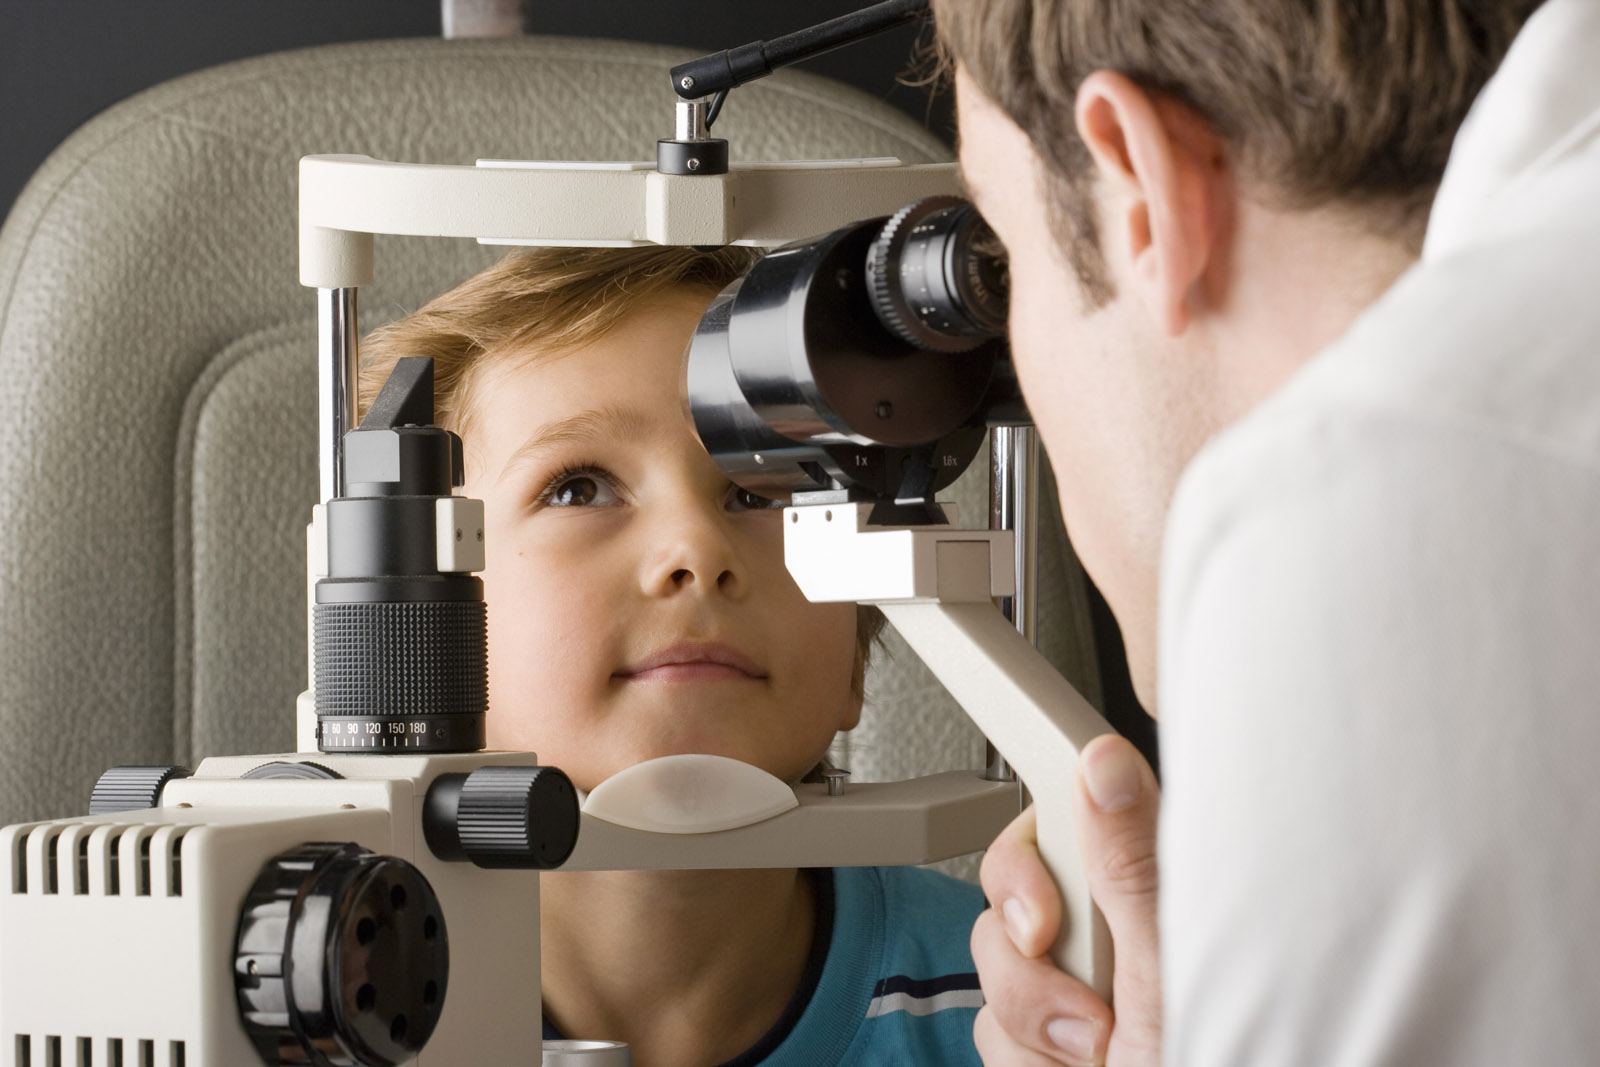 Eye exams could prevent health problems down the road